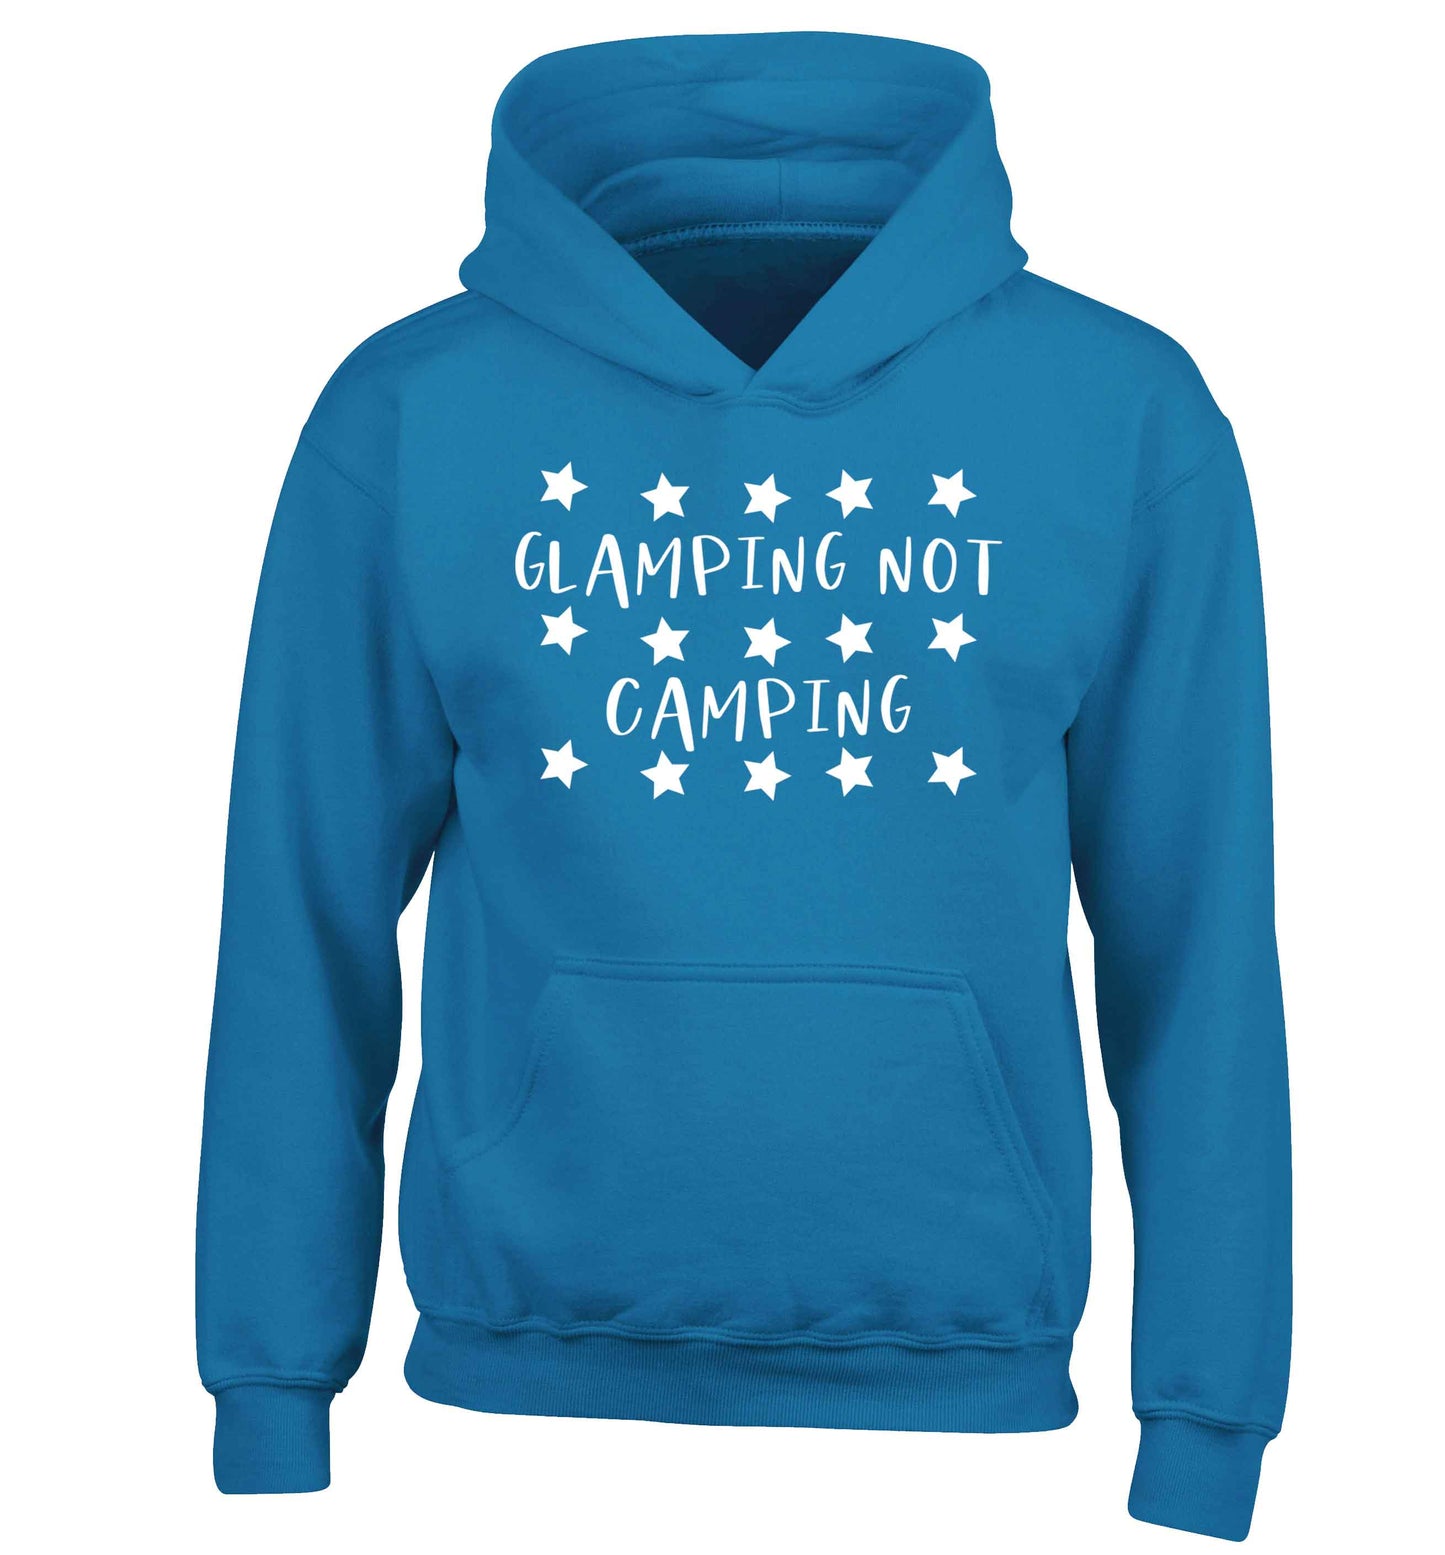 Glamping not camping children's blue hoodie 12-13 Years